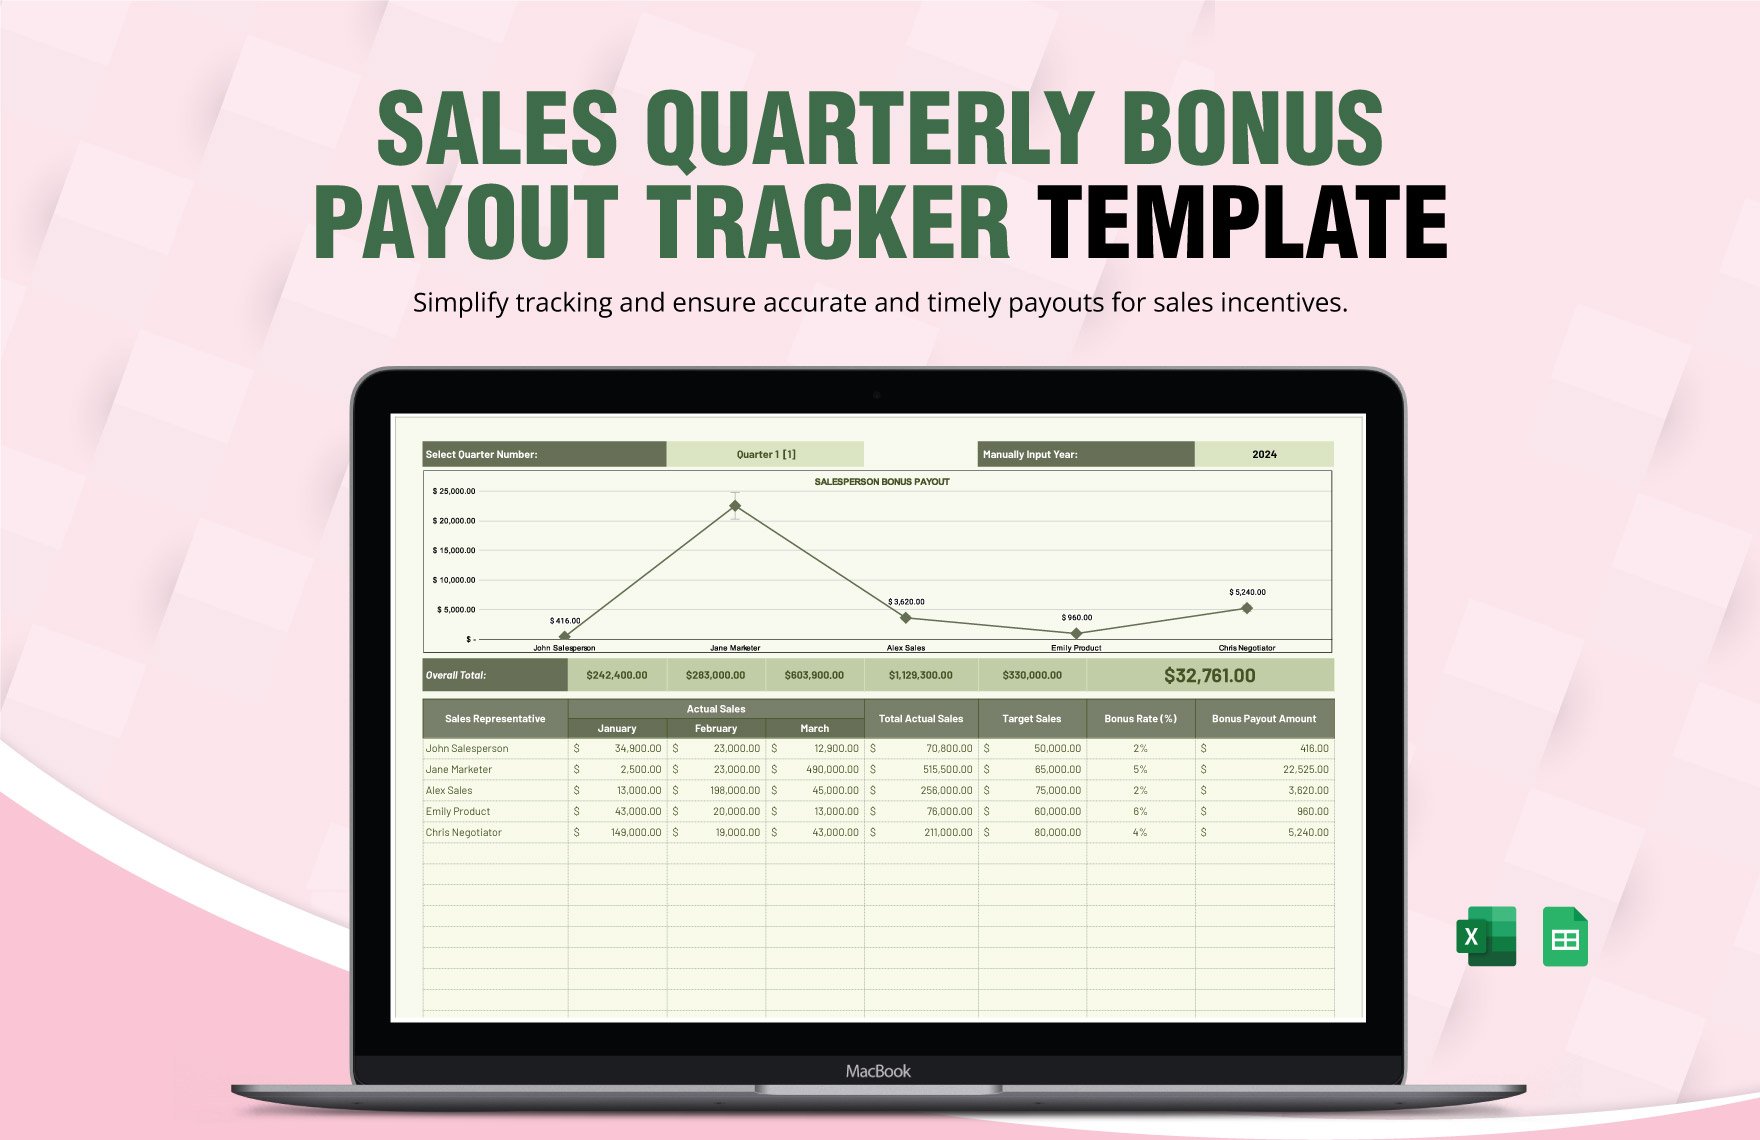 Sales Quarterly Bonus Payout Tracker Template in Excel, Google Sheets